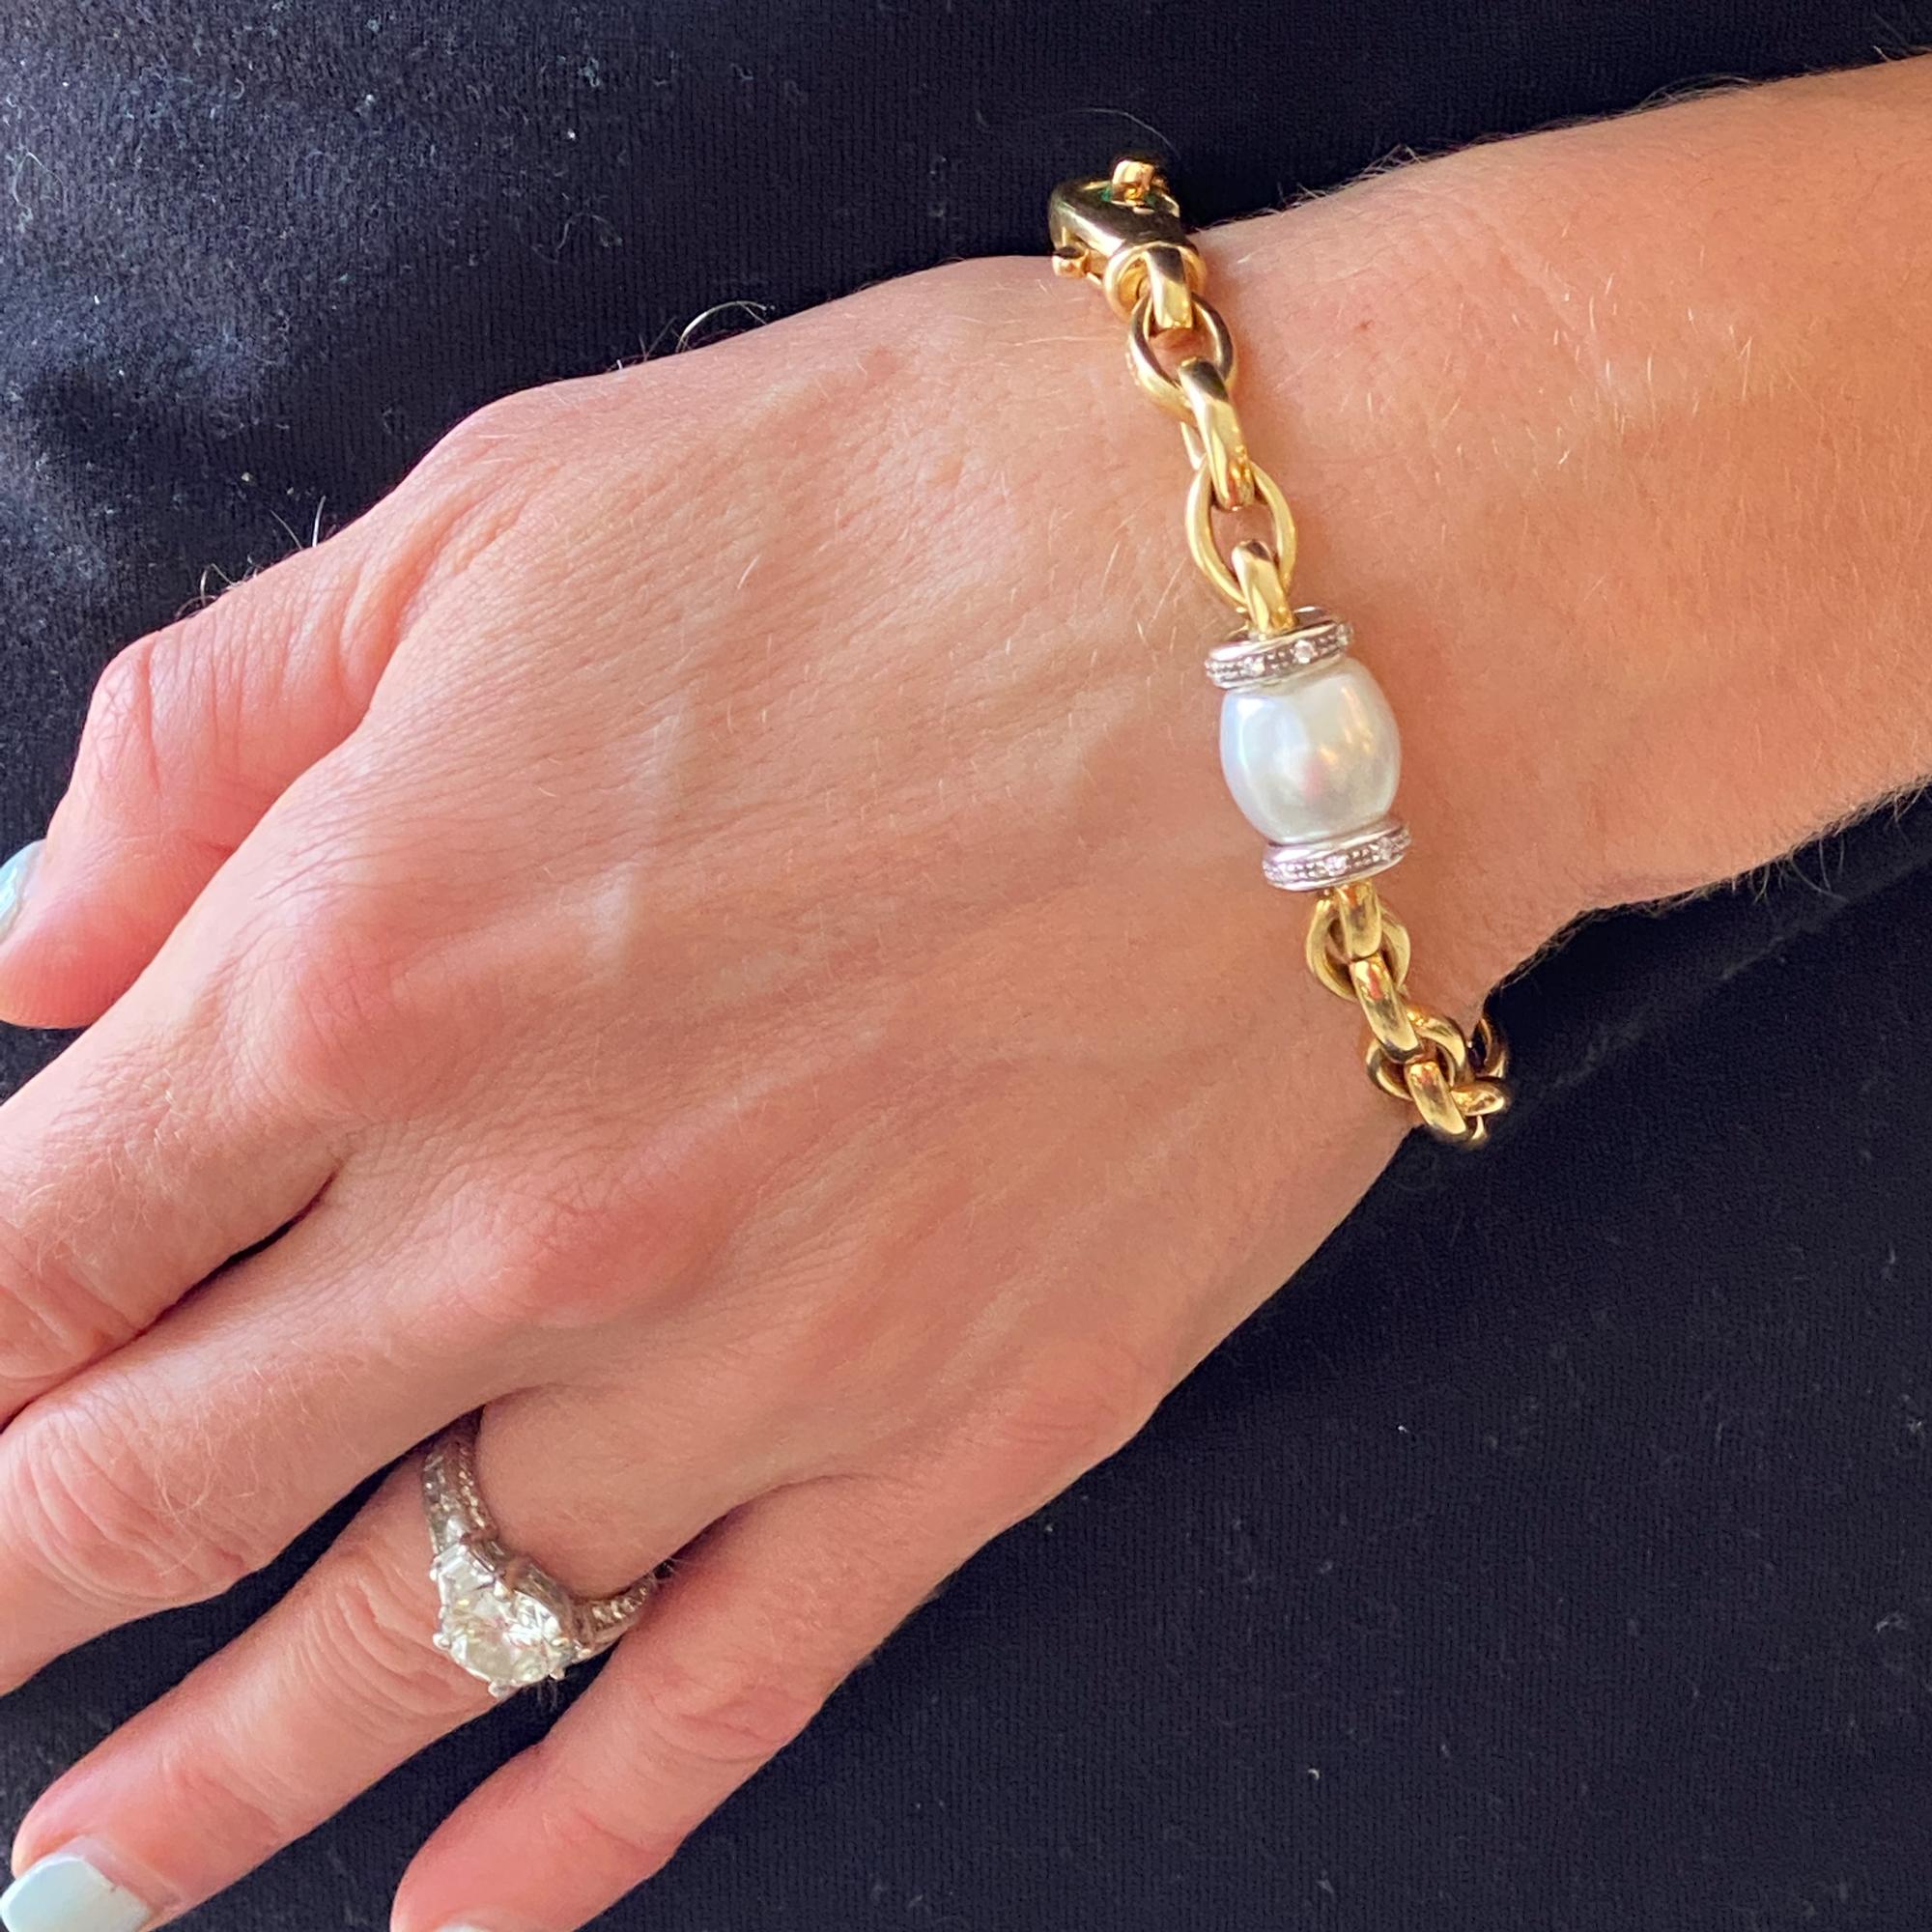 Beautiful cultured pearl diamond station oval link bracelet crafted in solid 18 karat yellow gold. The 12mm pearl is flanked by 16 round brilliant cut diamonds weighing .16 carat total weight. The bracelet measures 7 inches in length.